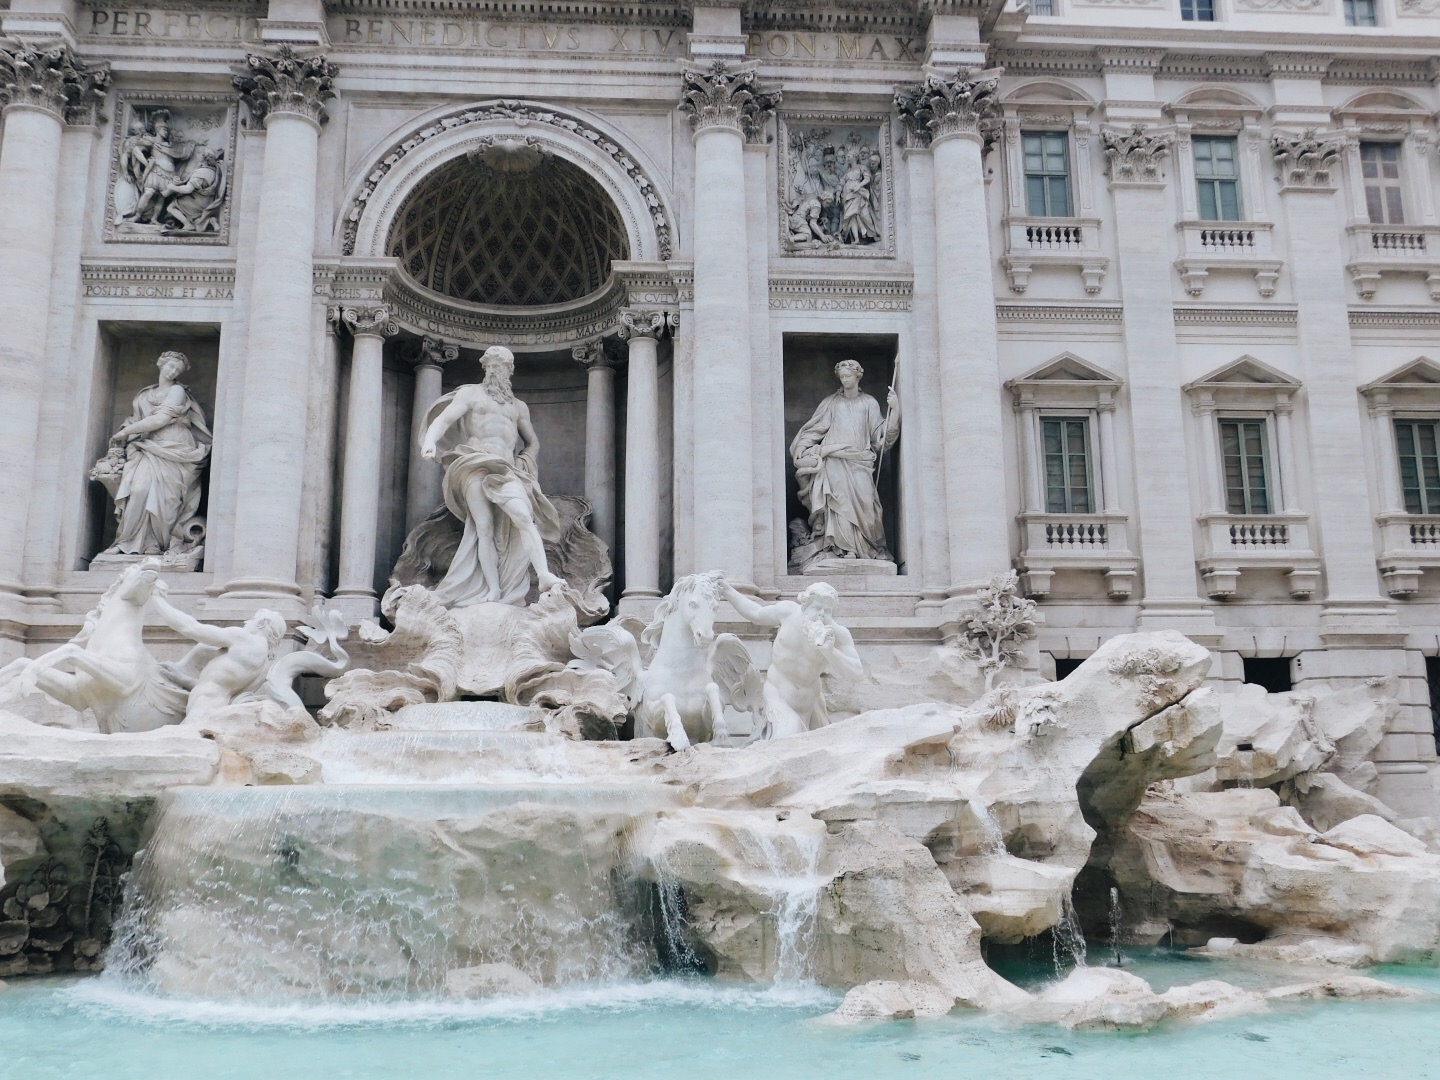 Toss a Coin in the Trevi Fountain - FlorenceForFun Tours and Travel